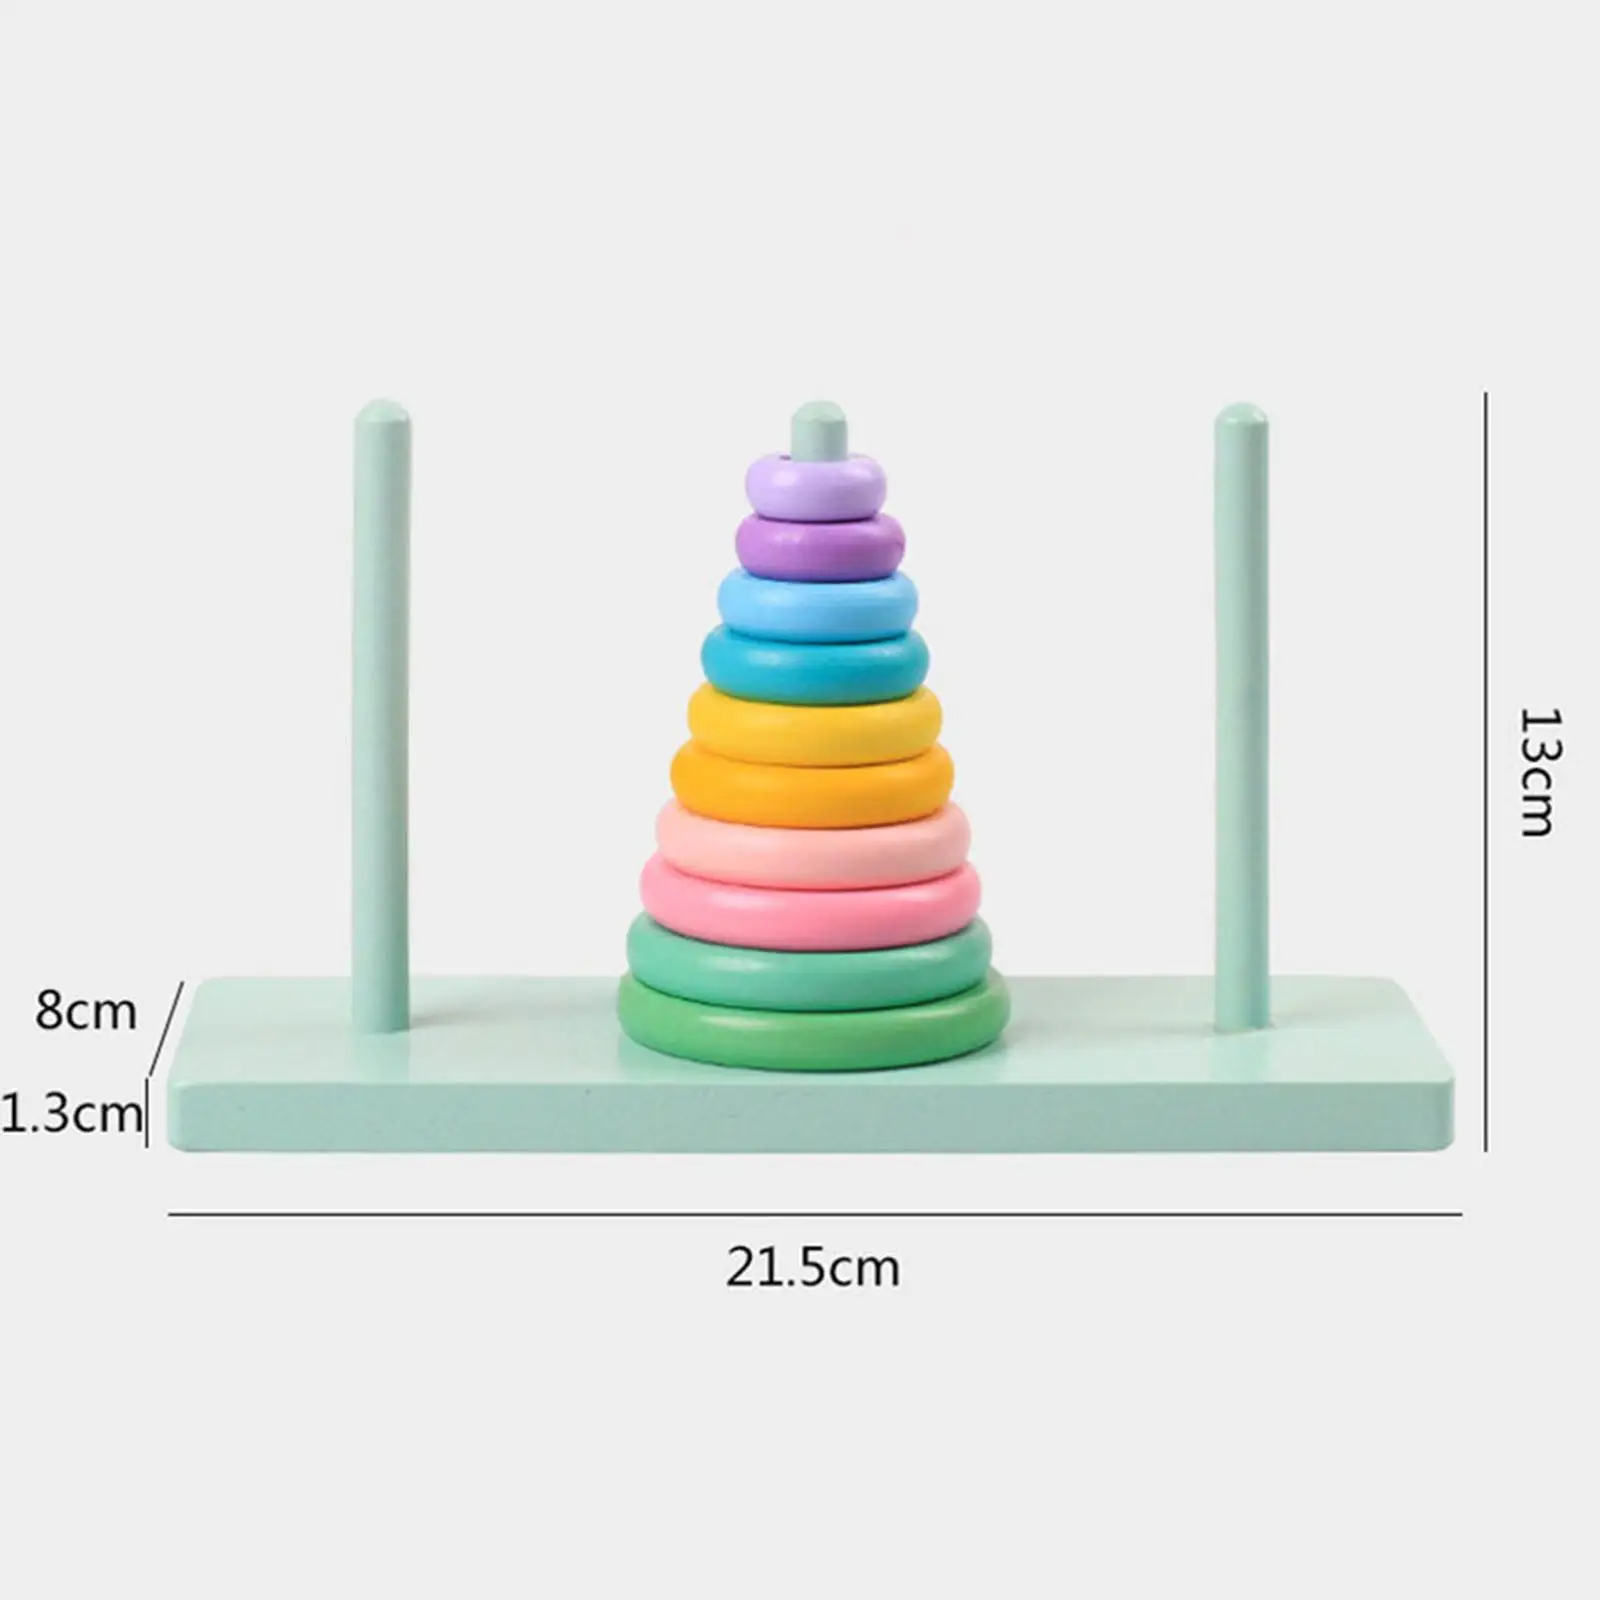 Baby Stacking Rings Toy Intellectual Toy Brain Teaser Stacker Toy for Children Boy Girls Kids Ages 6+ Months Birthday Gift